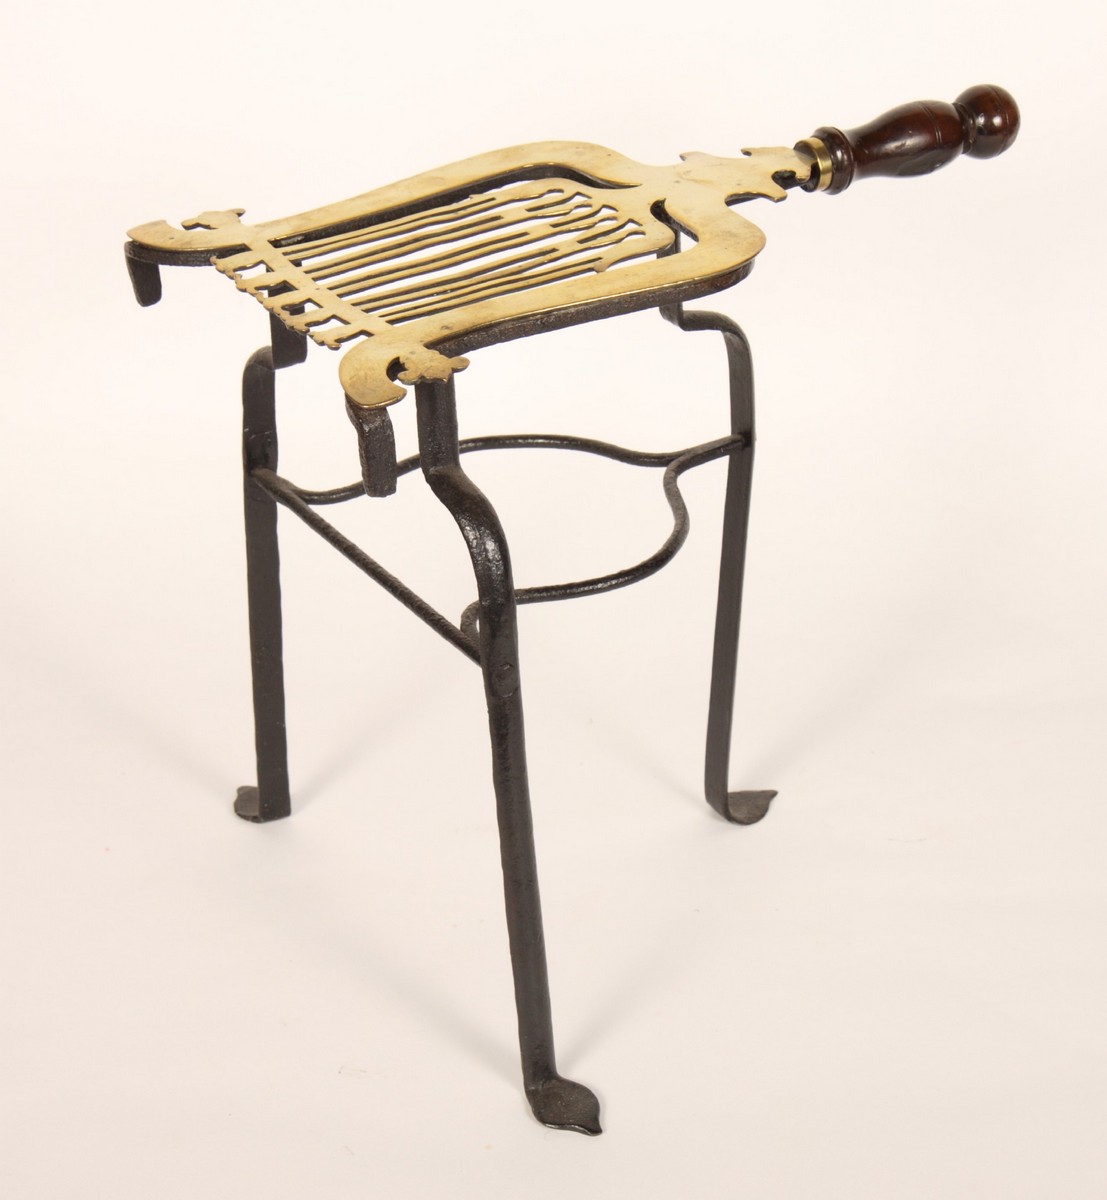 A 19th Century brass and wrought iron kettle stand